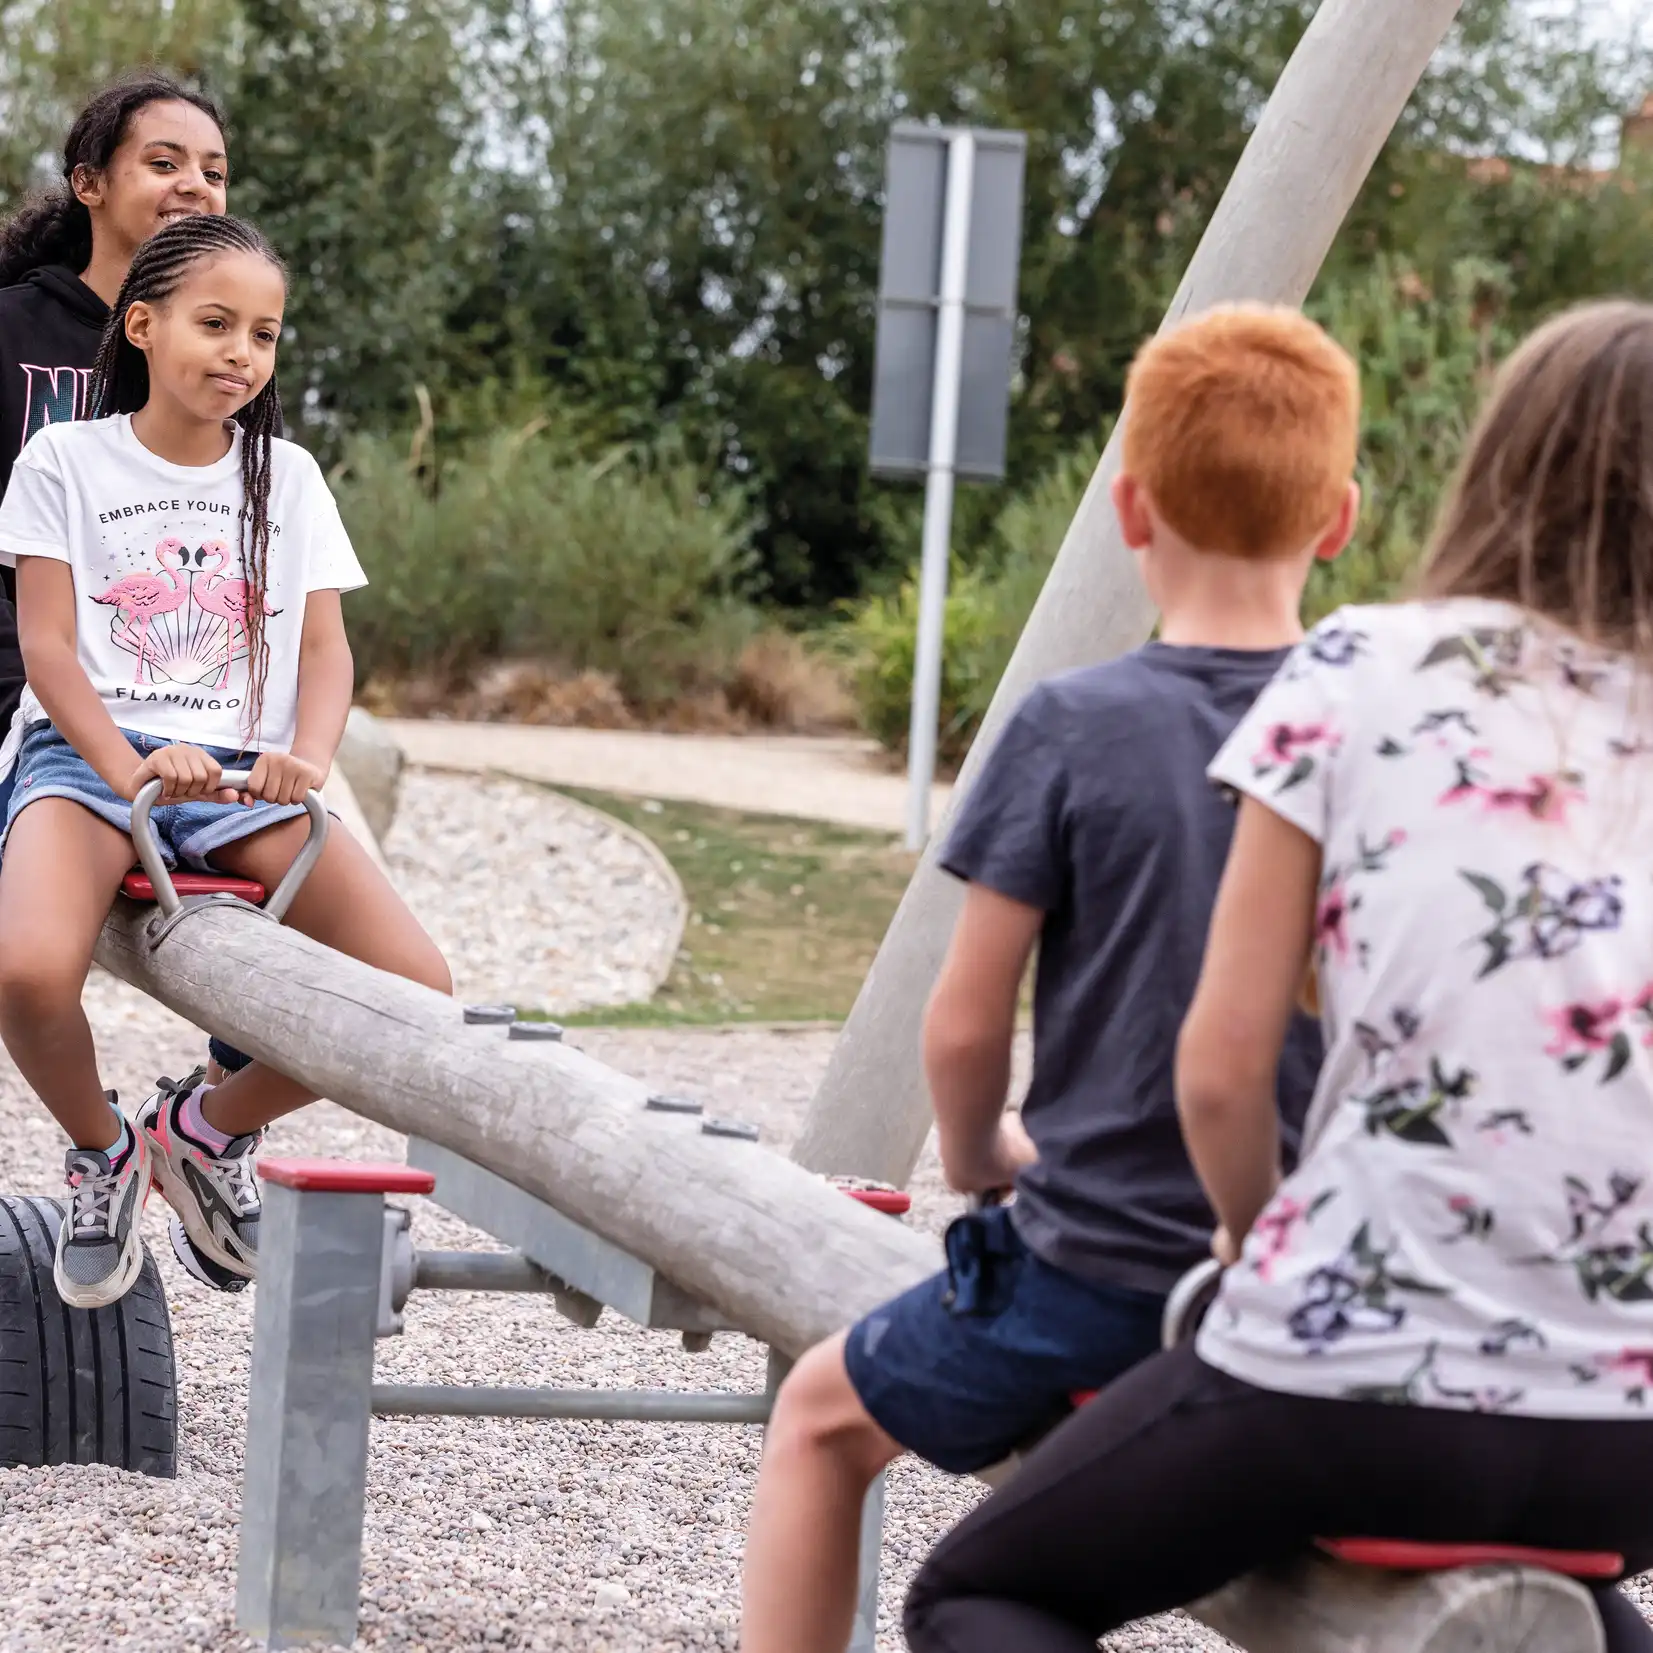 Children in a park, playing on a seesaw